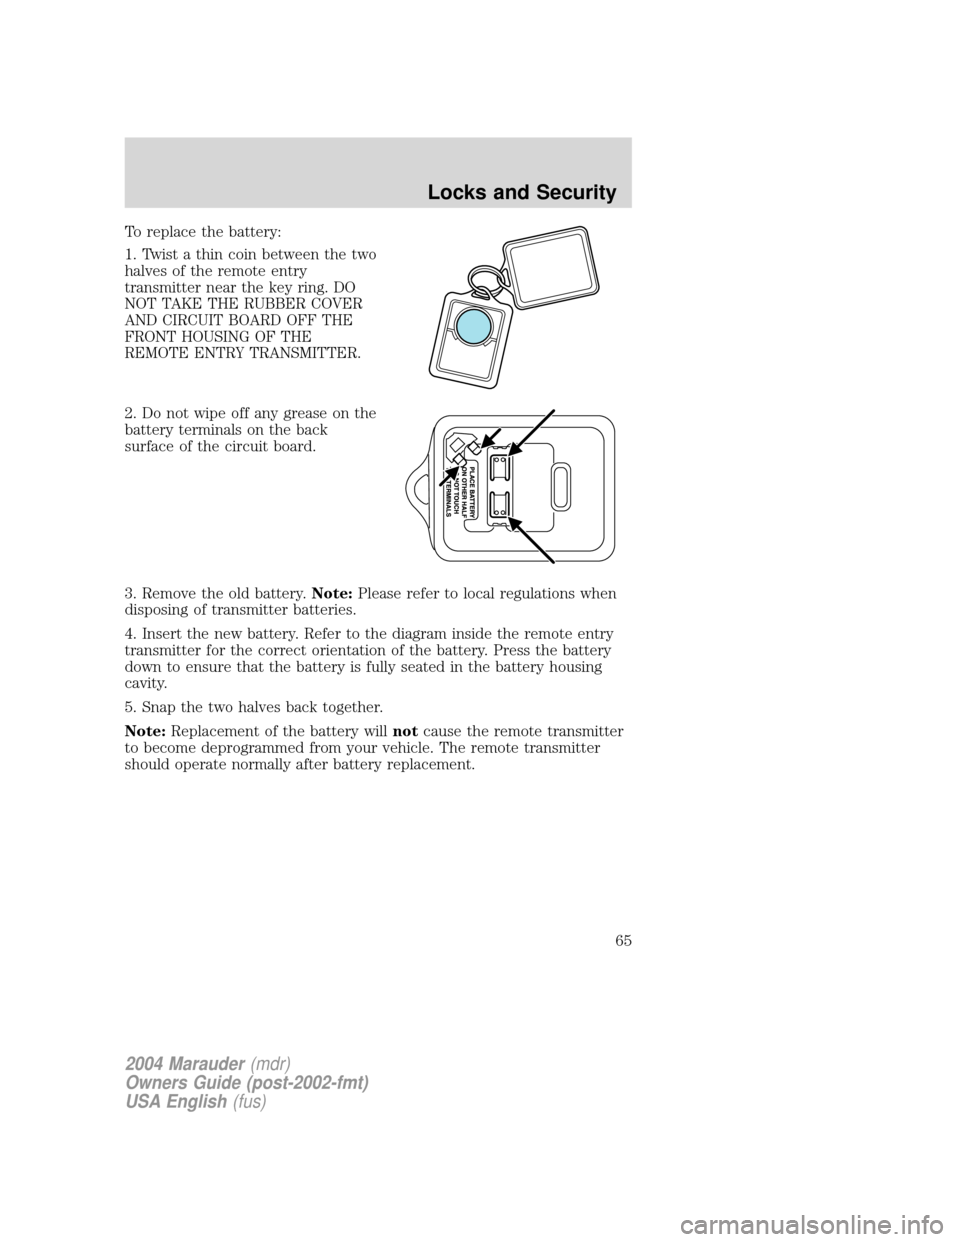 Mercury Marauder 2004  Owners Manuals To replace the battery:
1. Twist a thin coin between the two
halves of the remote entry
transmitter near the key ring. DO
NOT TAKE THE RUBBER COVER
AND CIRCUIT BOARD OFF THE
FRONT HOUSING OF THE
REMOT